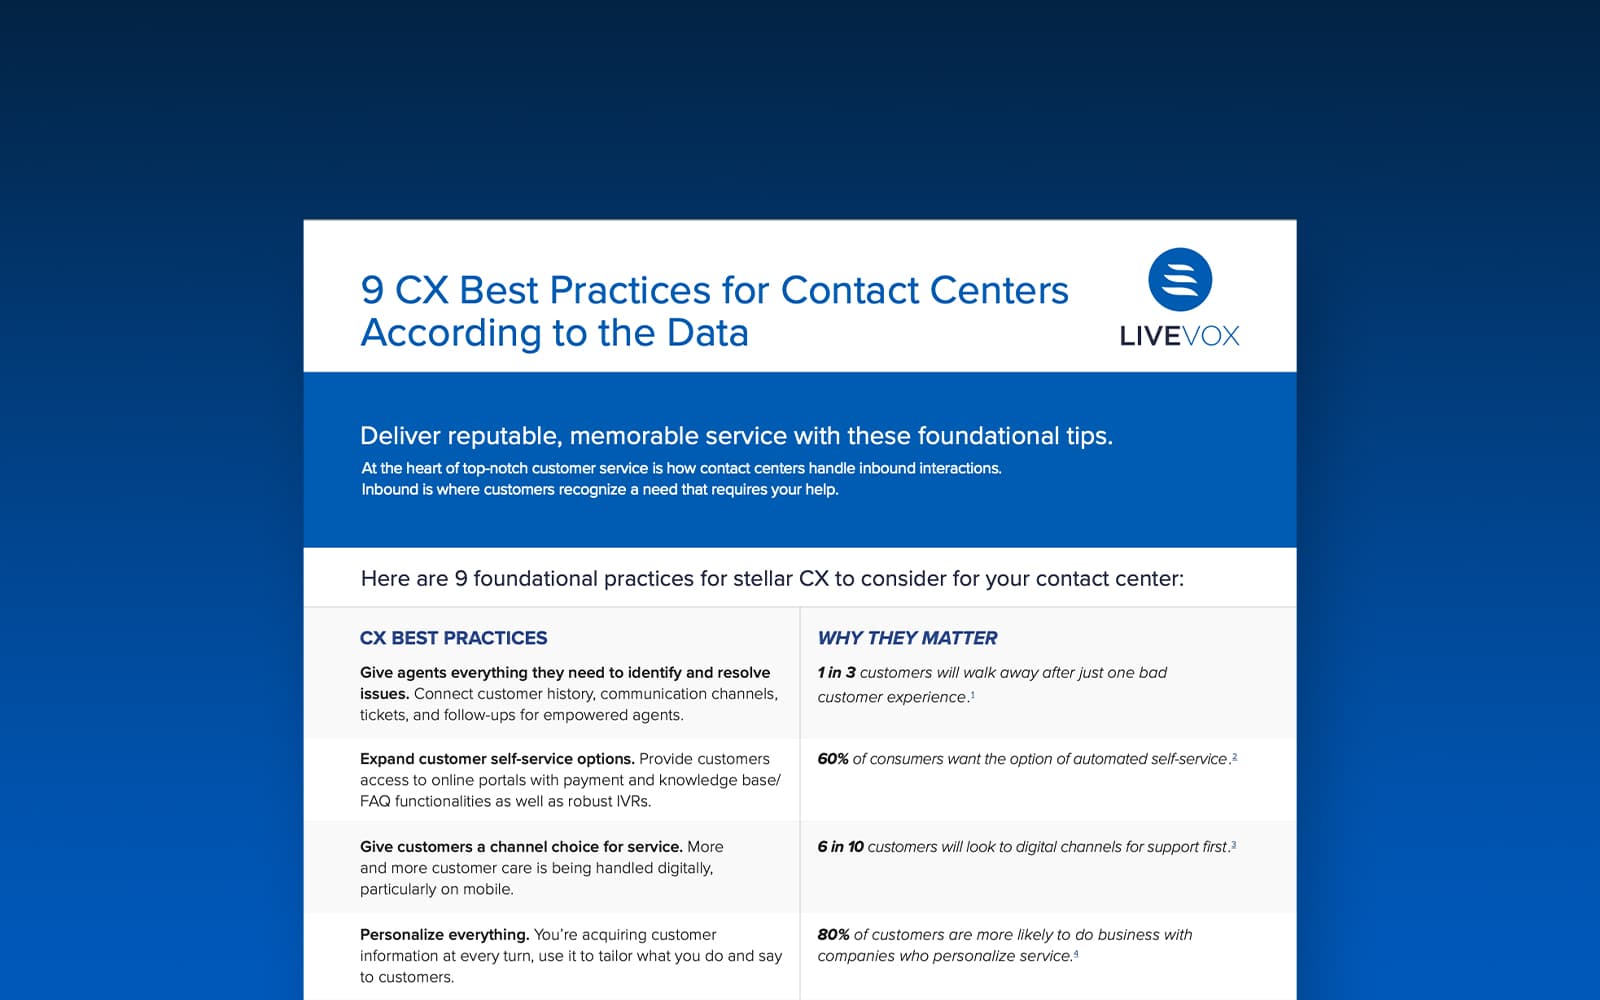 Tip Sheet: 9 CX Best Practices for Contact Centers According to the Data